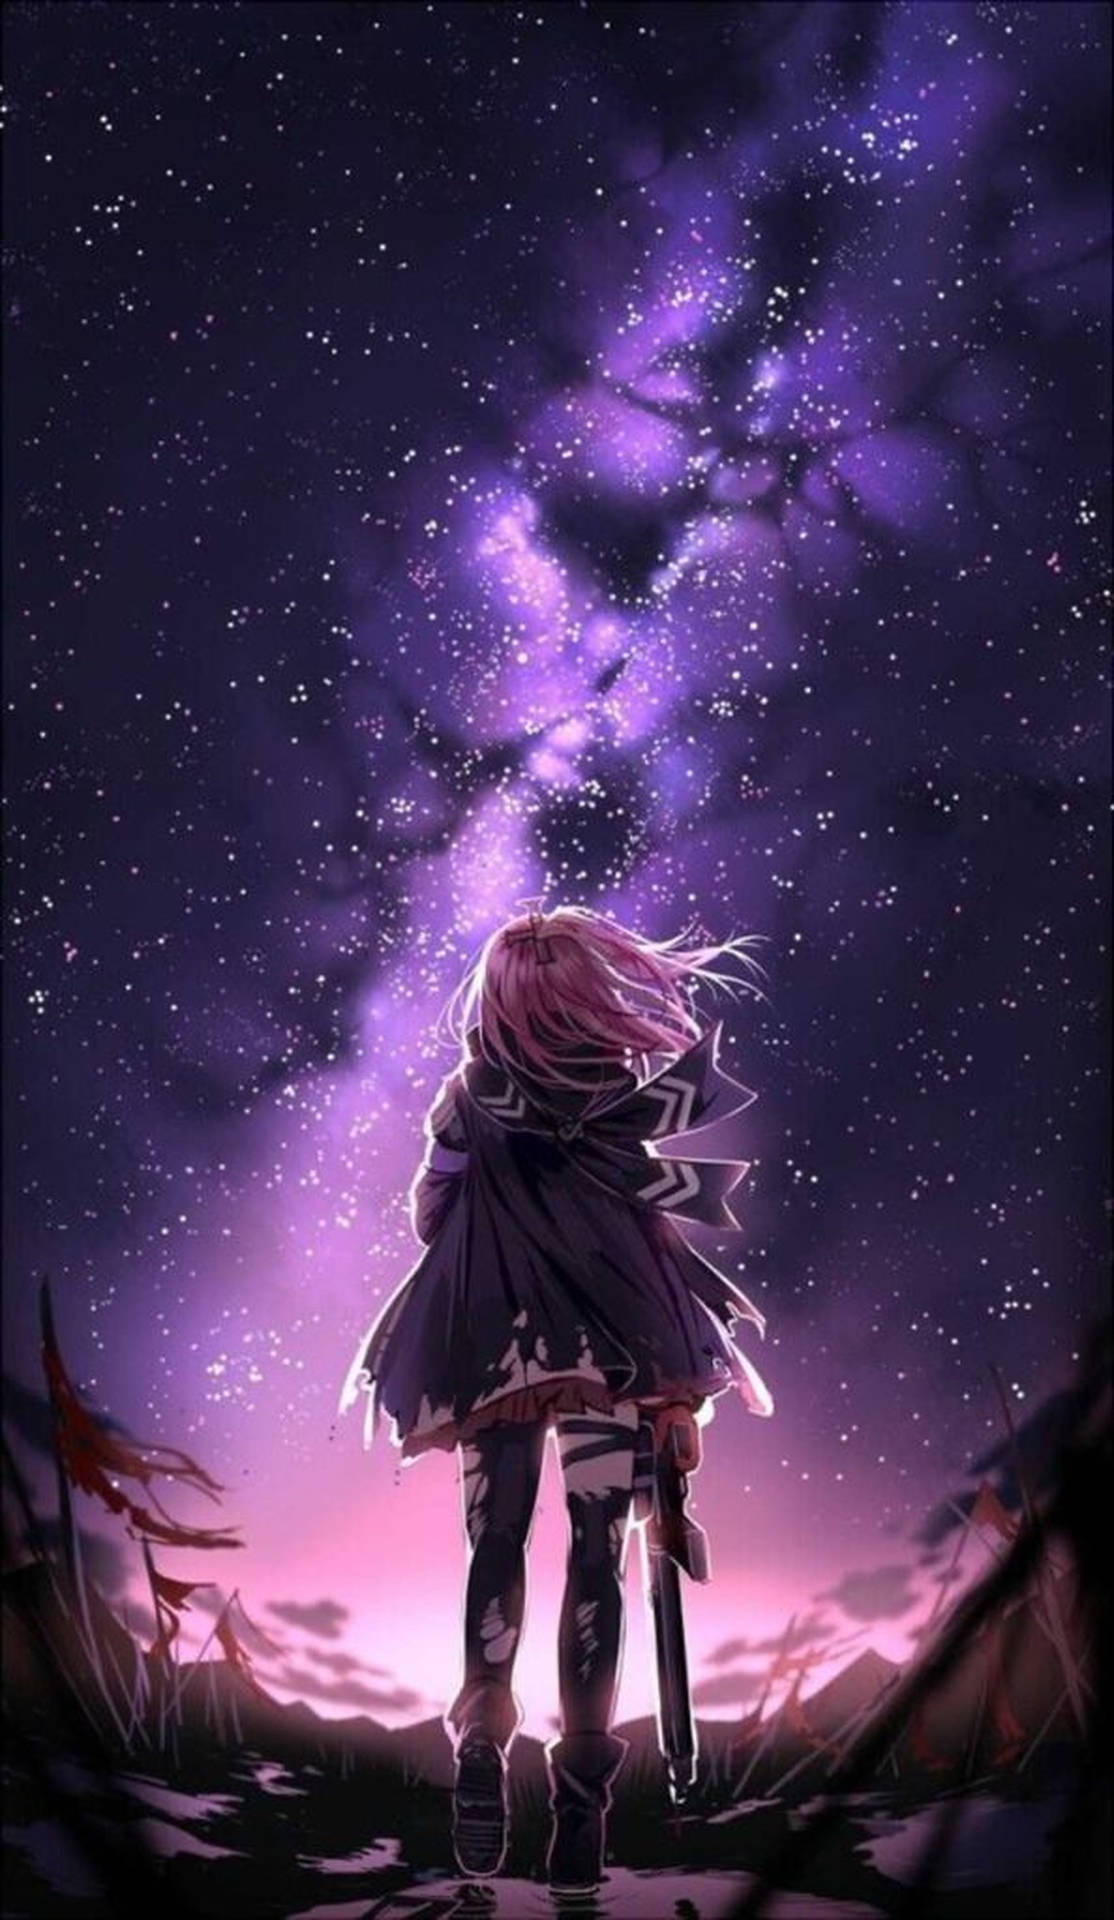 Live wallpaper Girl admiring the starry sky in an open field DOWNLOAD